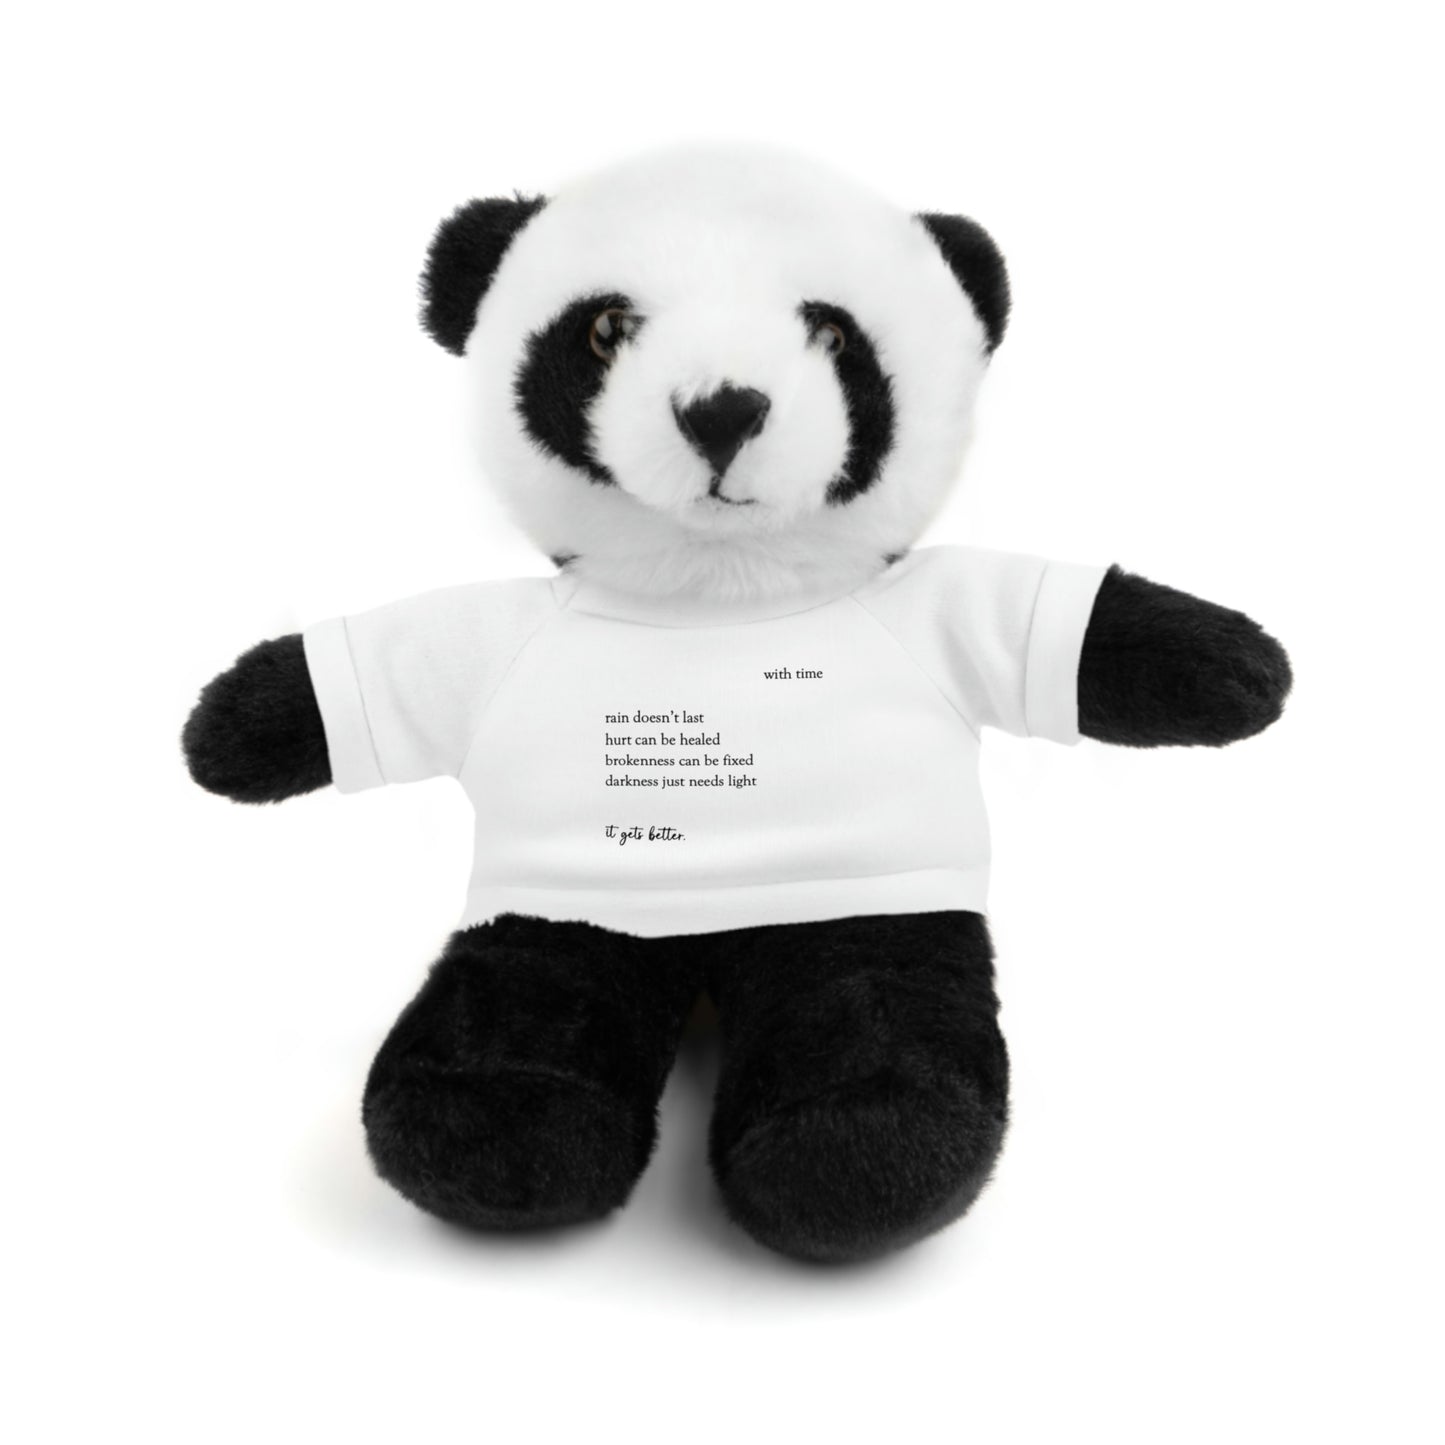 Stuffed Animals with "It Gets Better" Tee